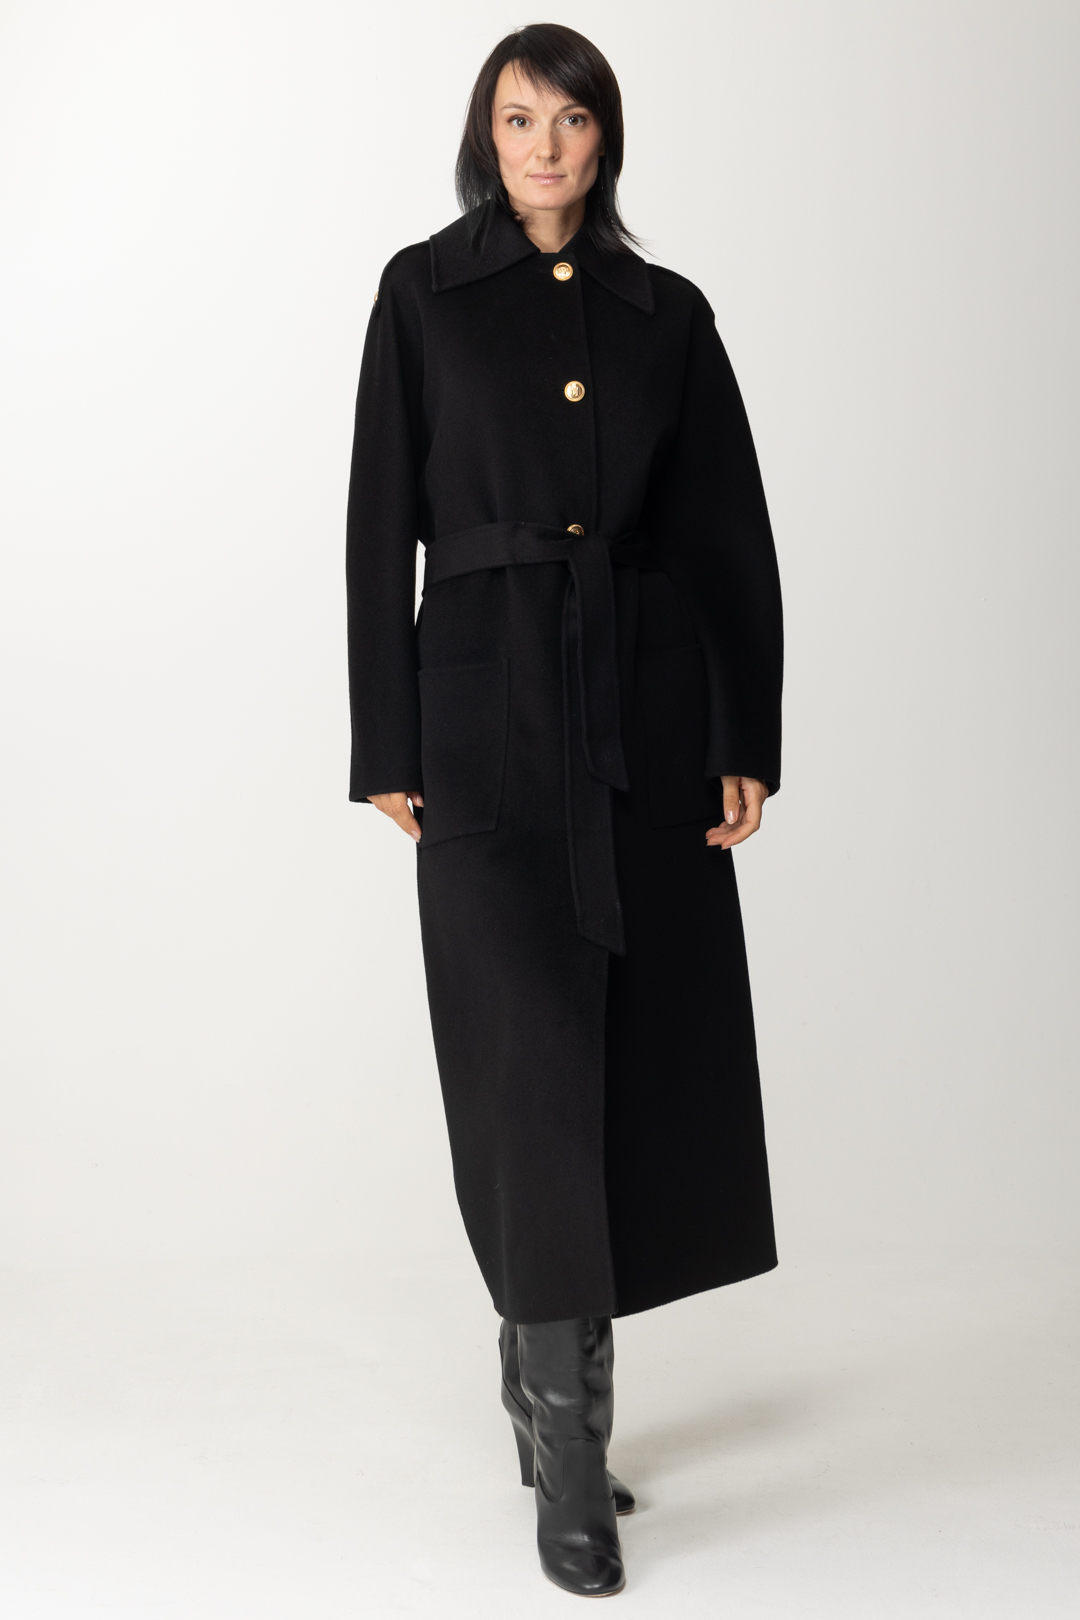 Preview: Elisabetta Franchi Wool coat with shirt collar Nero